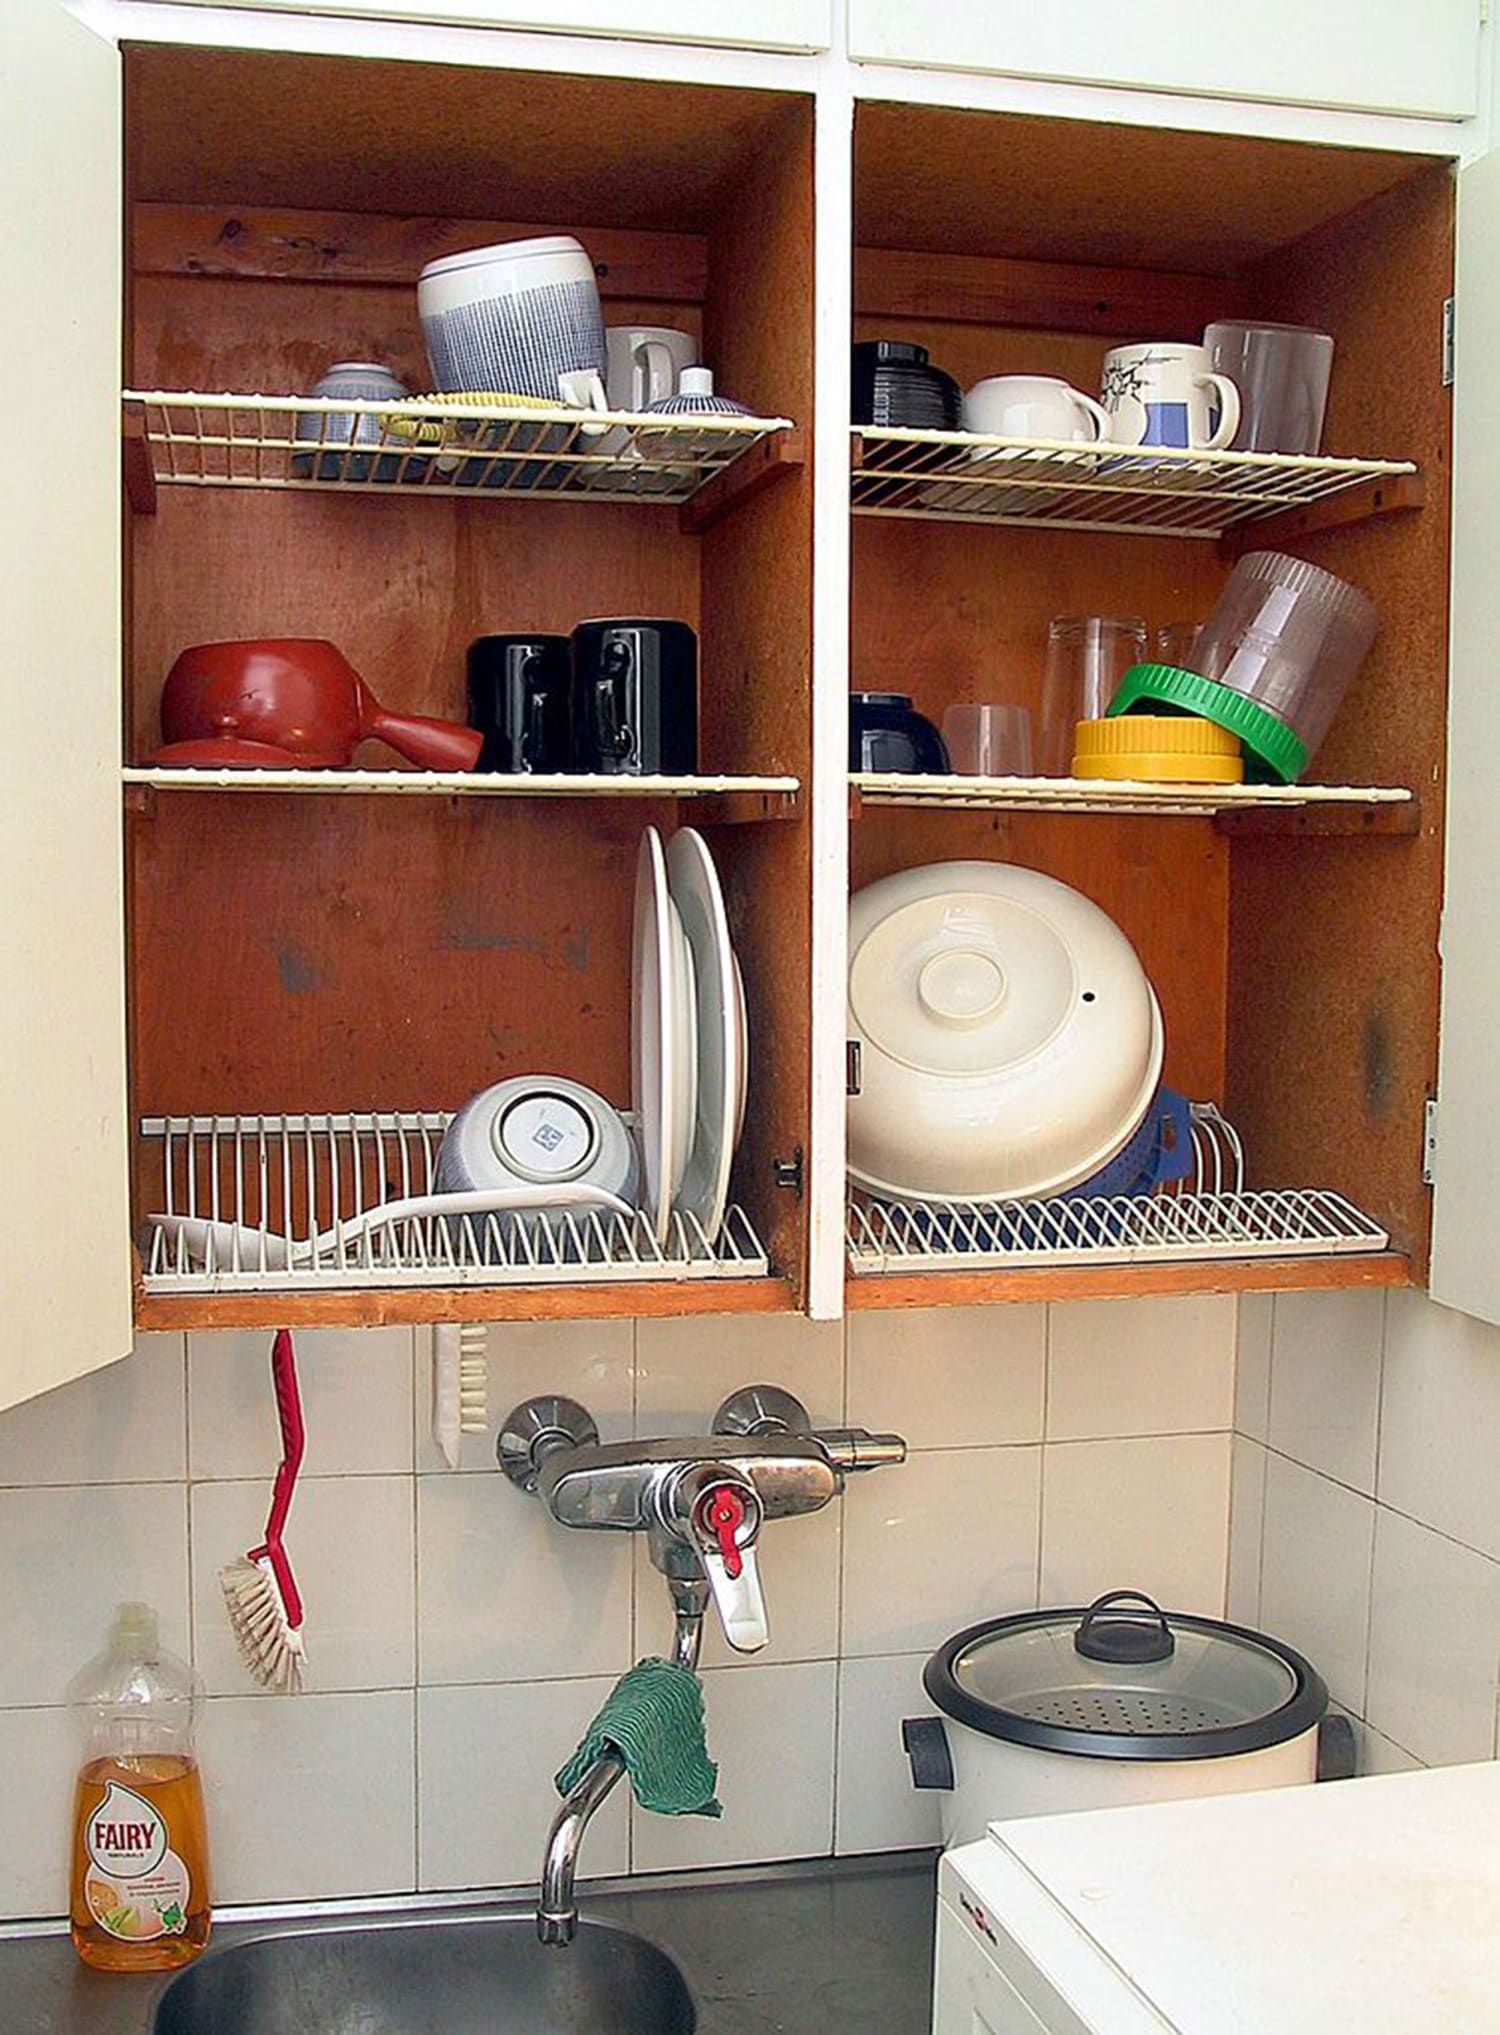 Finnish the Dishes: Simple Nordic Design Beats Dishwashers